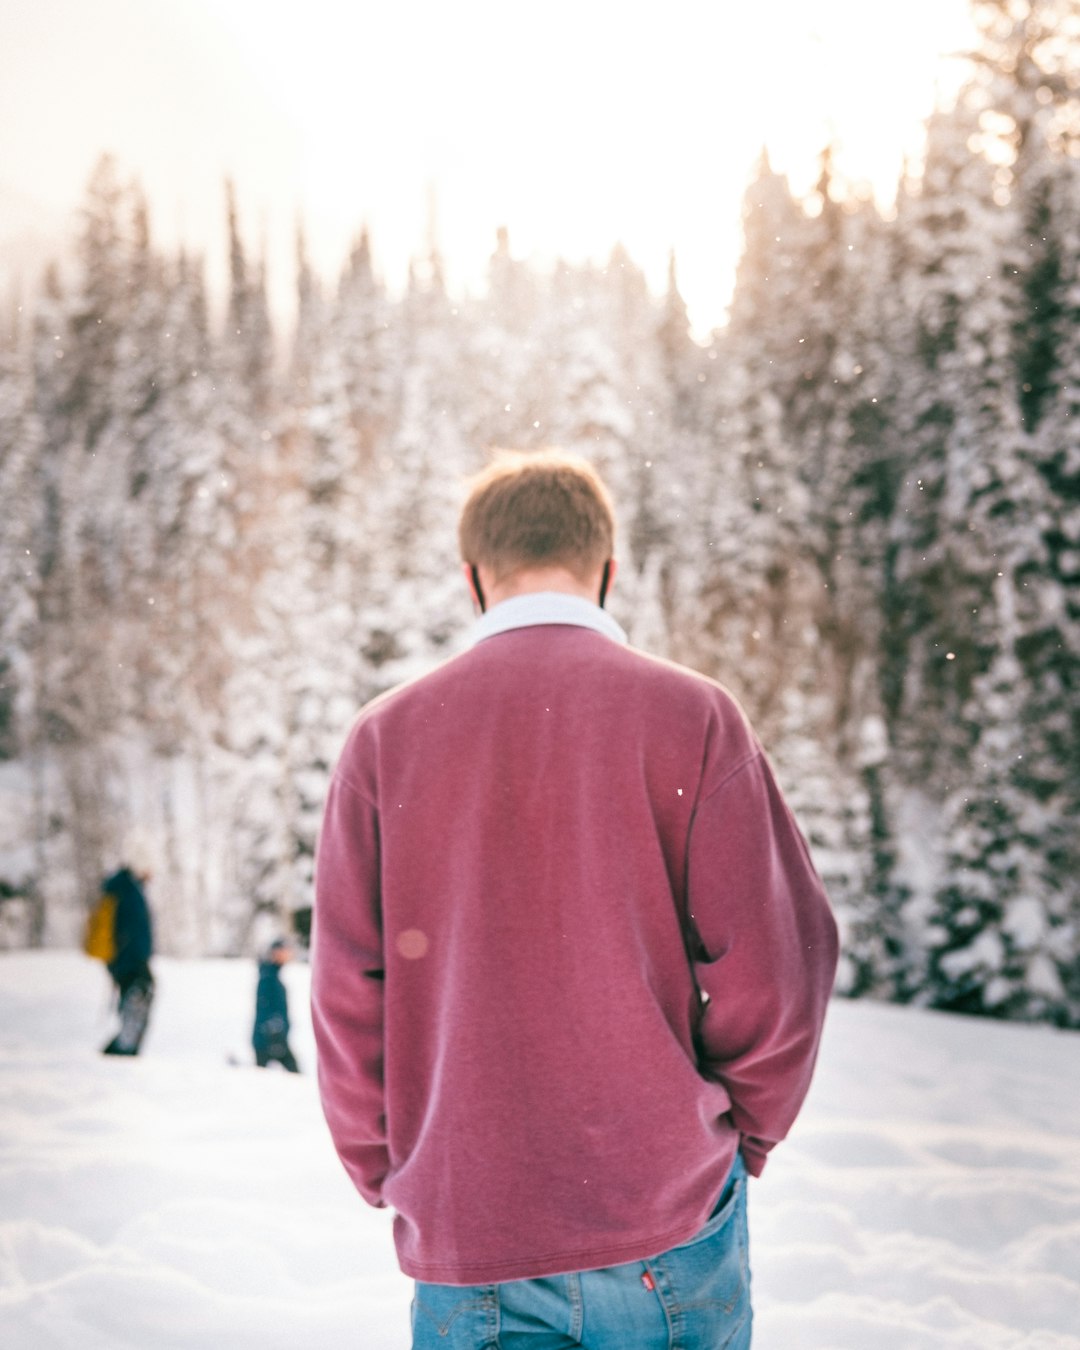 man in red coat walking on snow covered ground during daytime